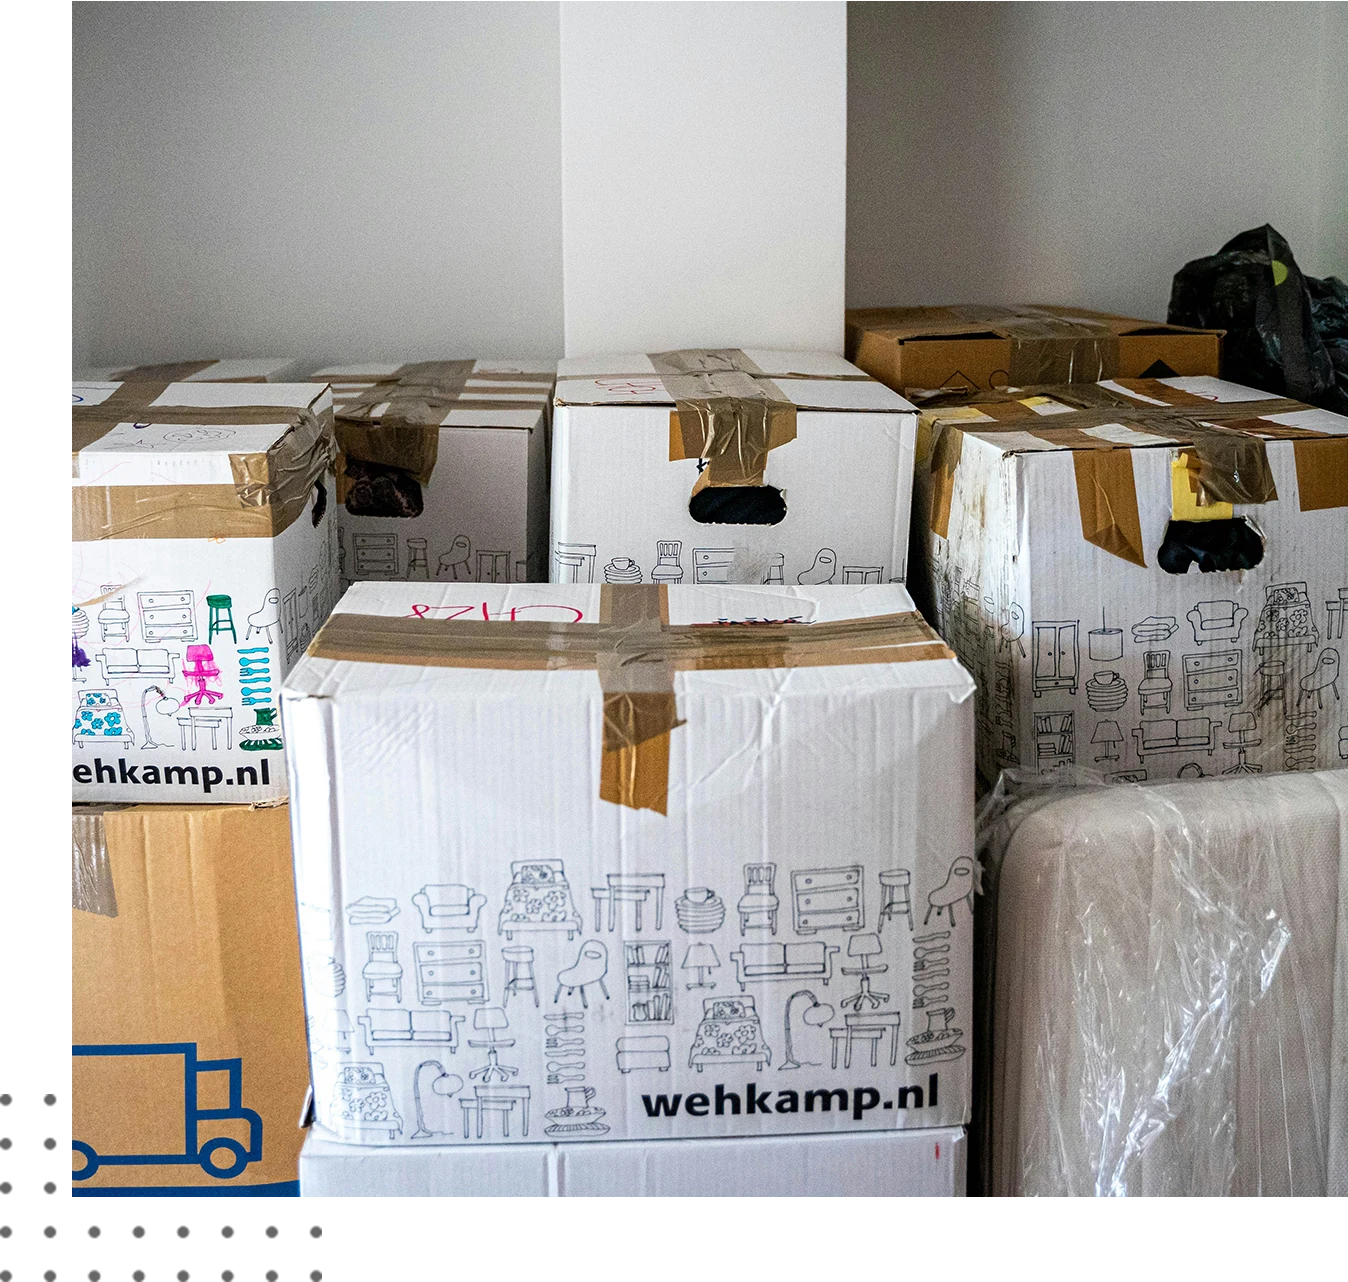 Several taped cardboard moving boxes are stacked in a room against a white wall. The boxes feature illustrations of household items and bear the website name "wehkamp.nl.